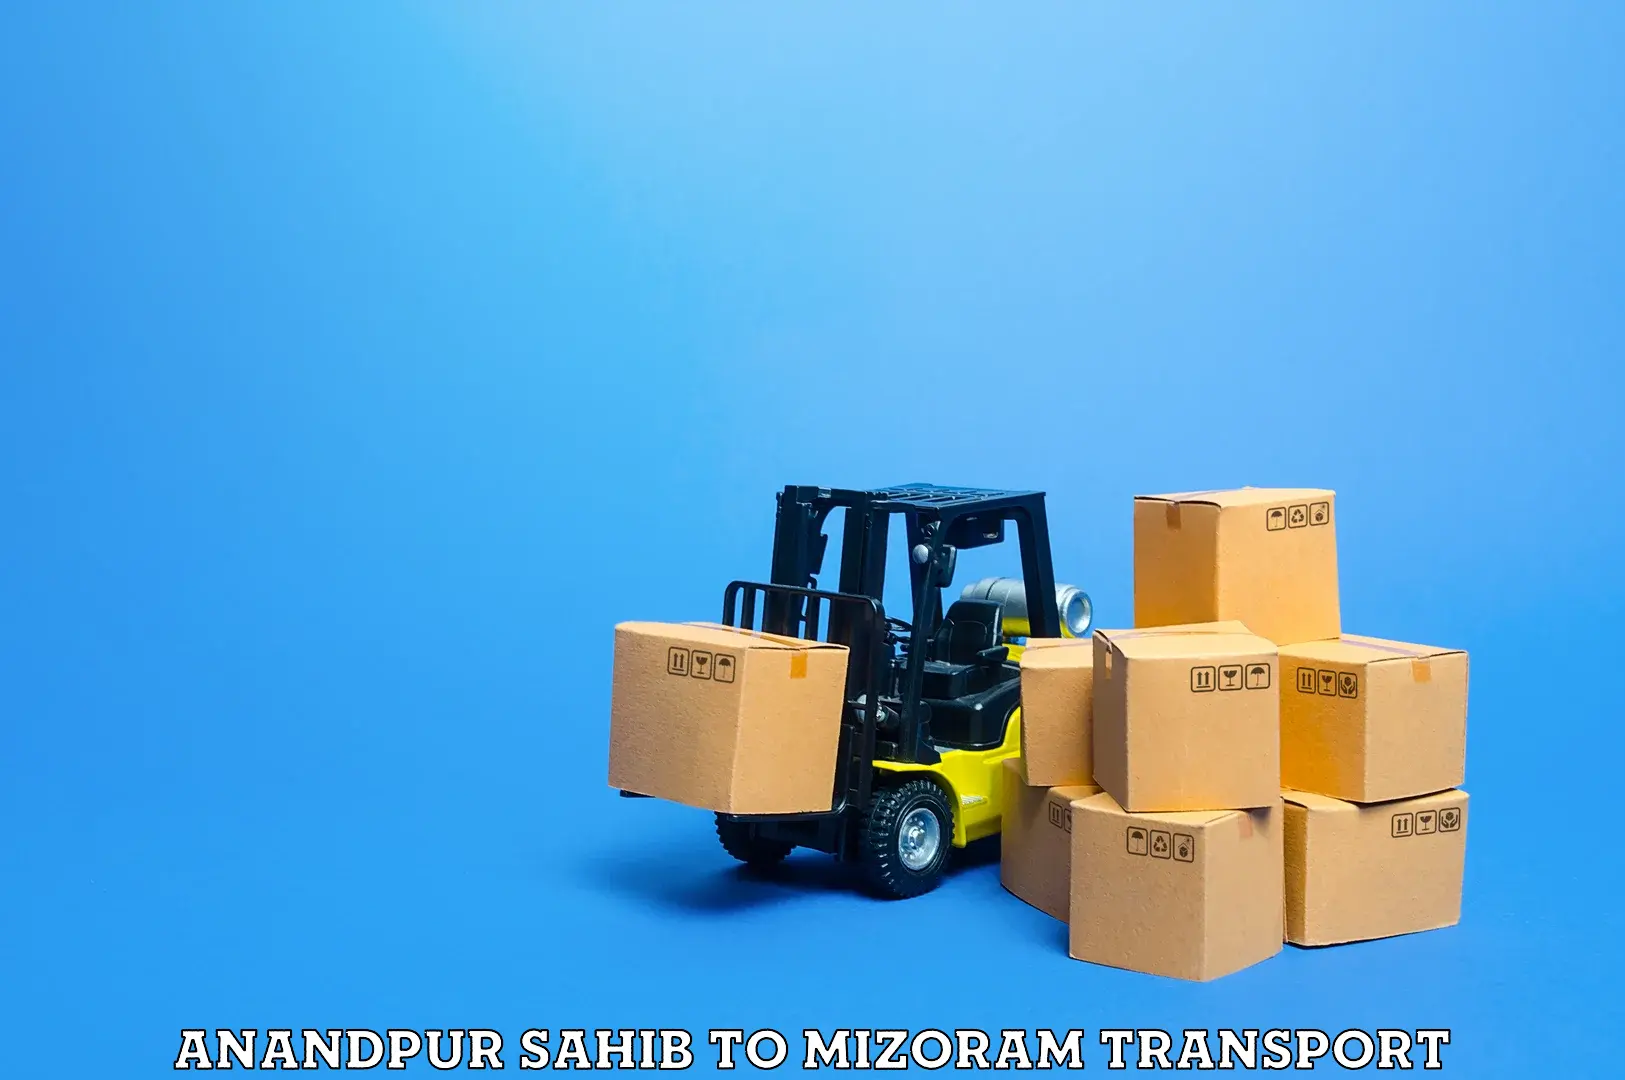 Transport bike from one state to another Anandpur Sahib to Mizoram